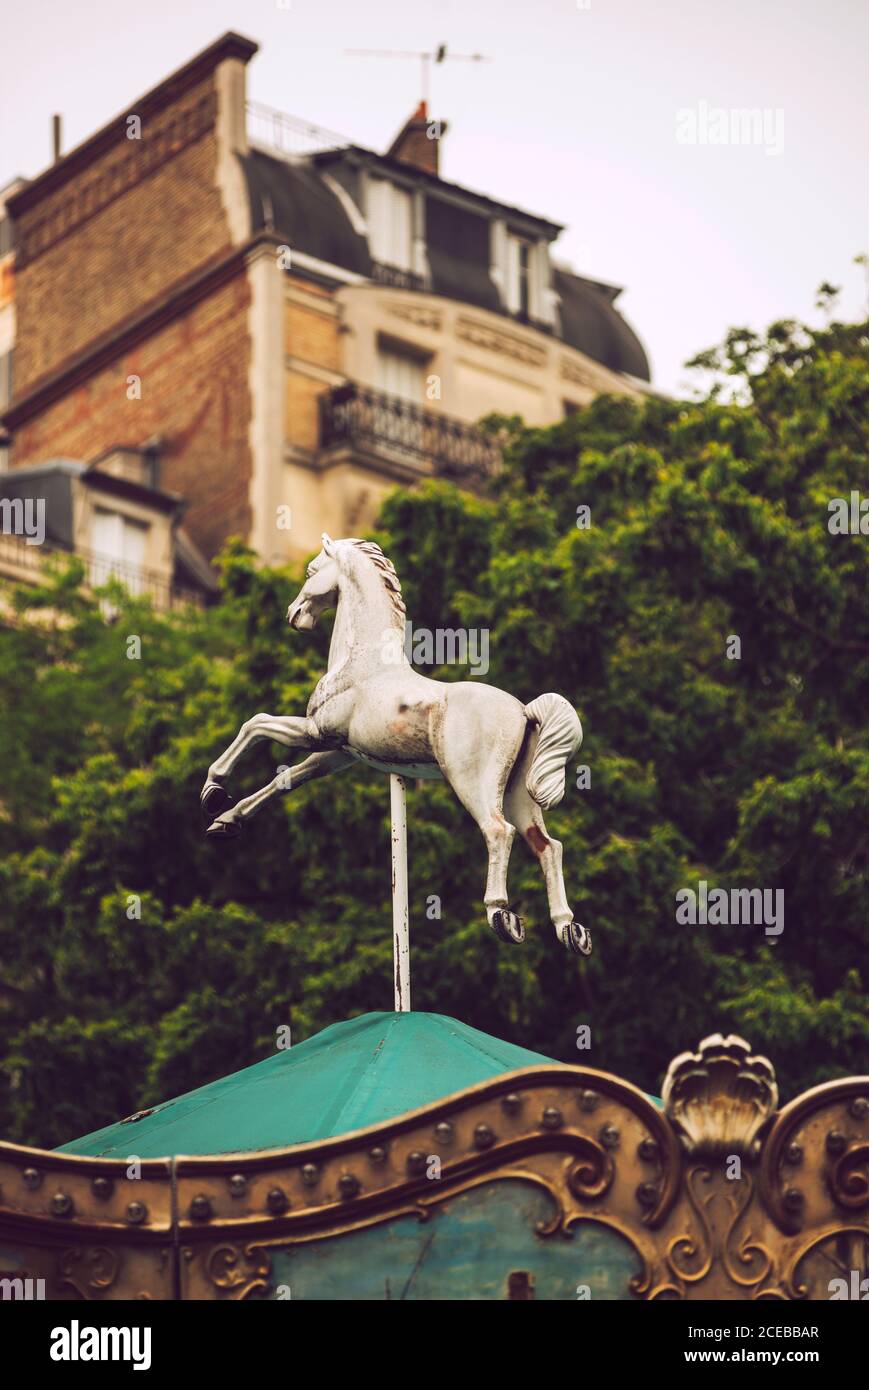 Close up view of white horse statue on green rooftop on background of trees and stone building in Paris Stock Photo